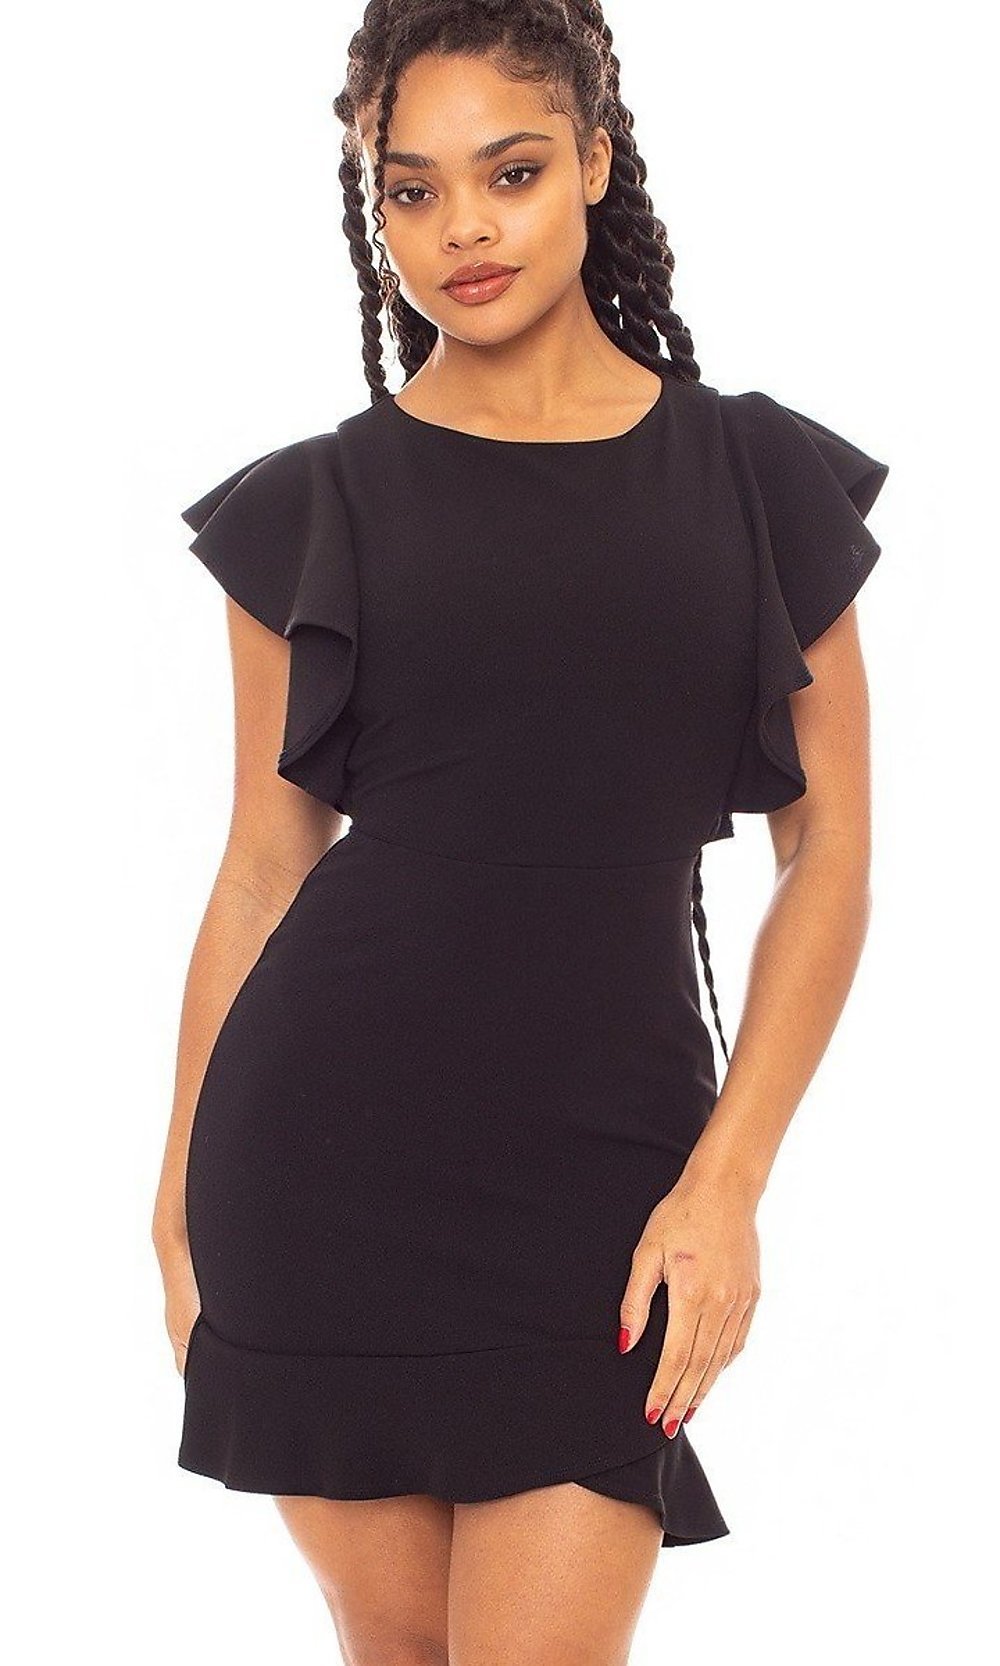 Chevy Black | Fitted Short Dress w/ Ruffles